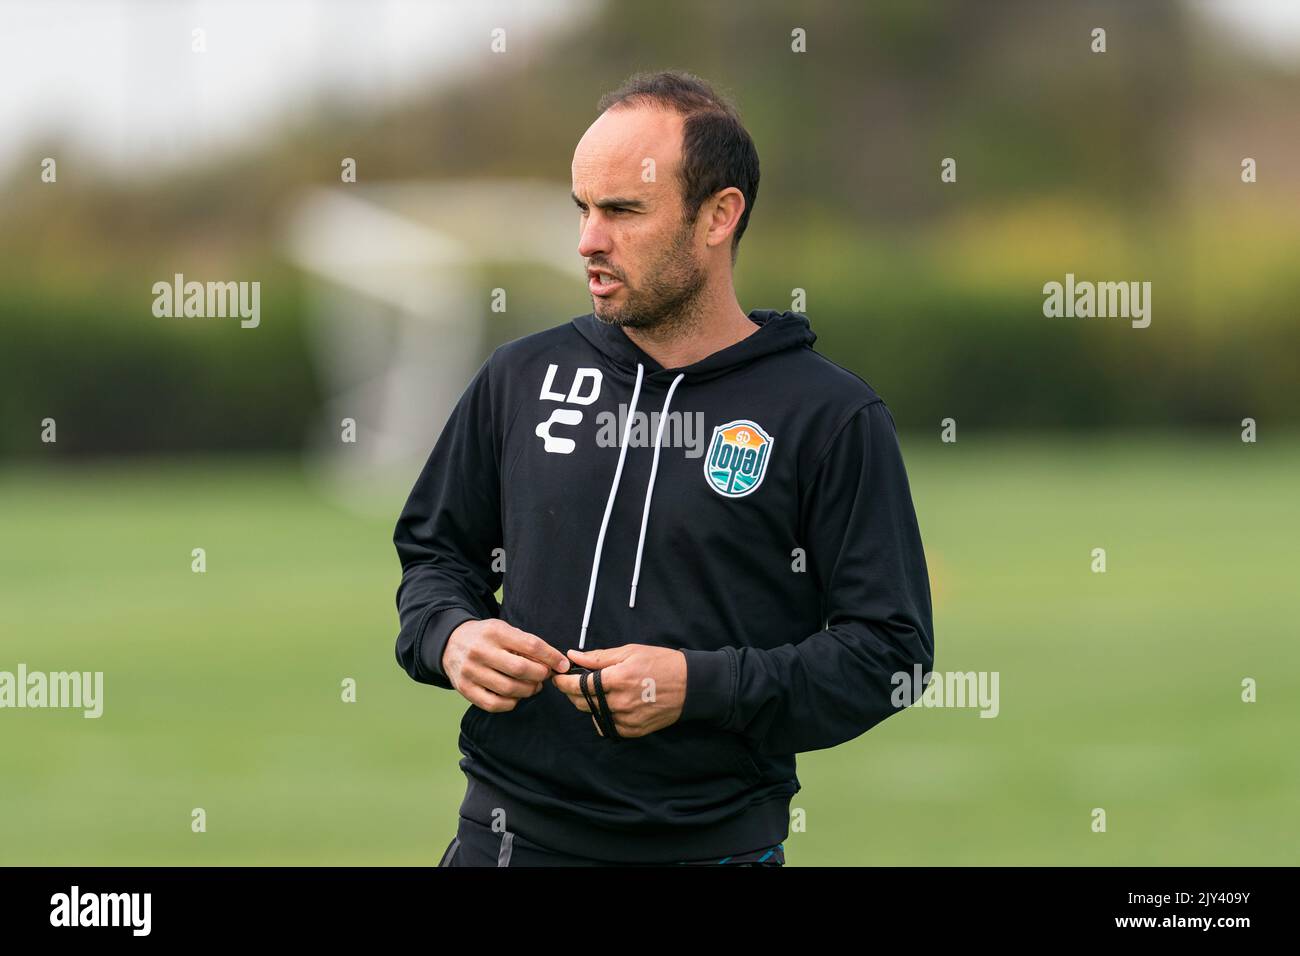 Landon Donovan, manager of the San Diego Loyal, overlooking training Stock Photo